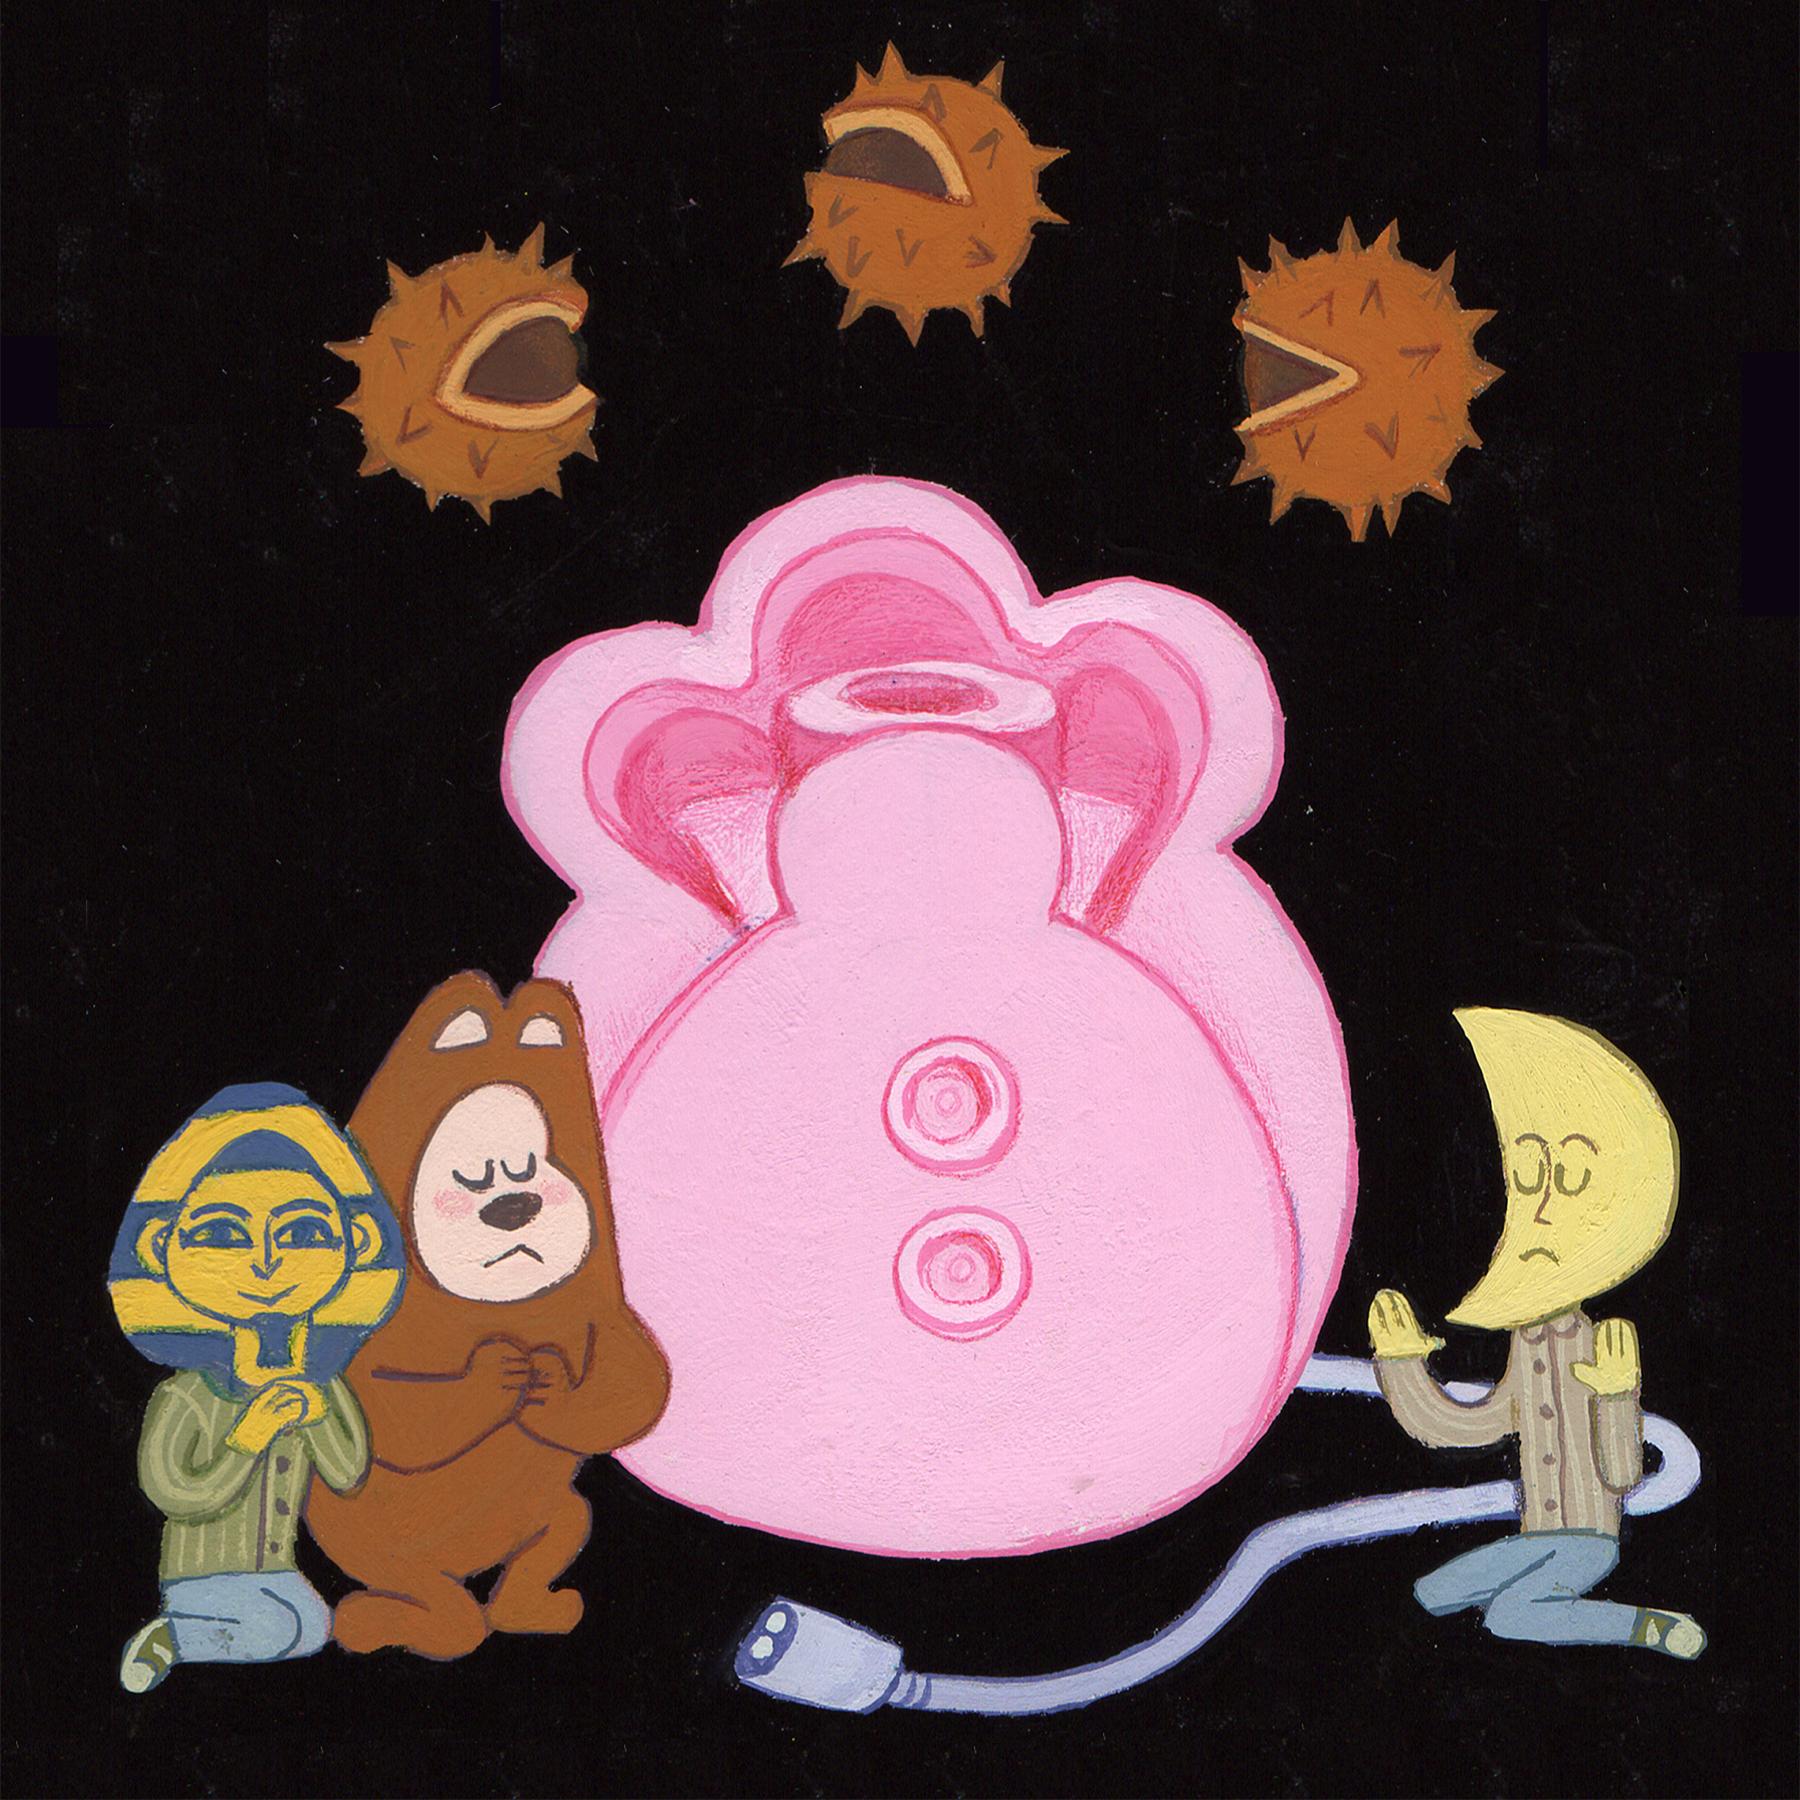 Painting of a cartoon bear, Egyptian Pharaoh, and an anthropomorphic Moon worshipping a rose vibrator.